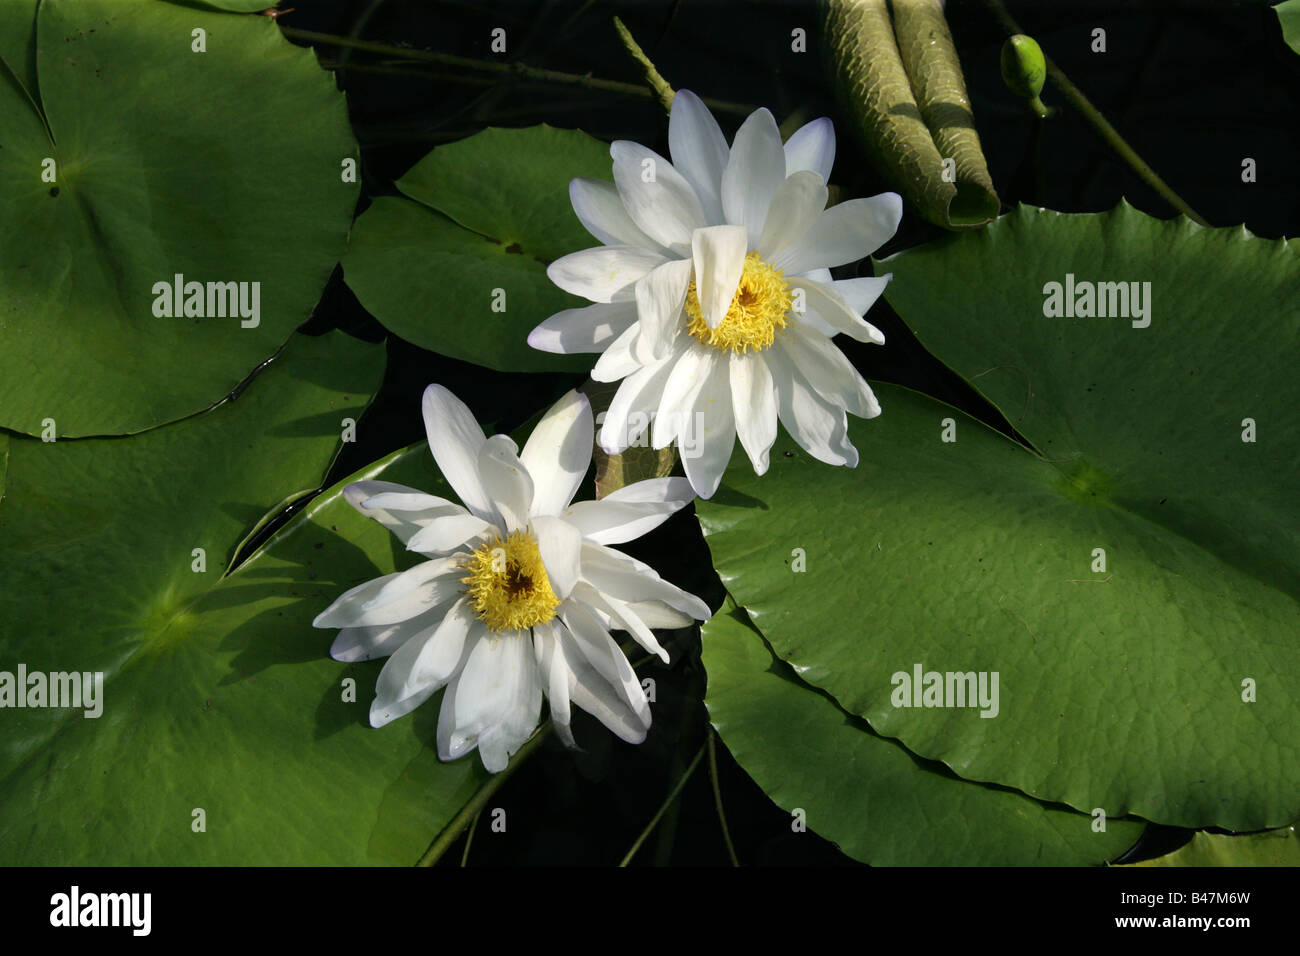 Water Lily, Nymphaea violacea, Nymphaeaceae, Australia Stock Photo